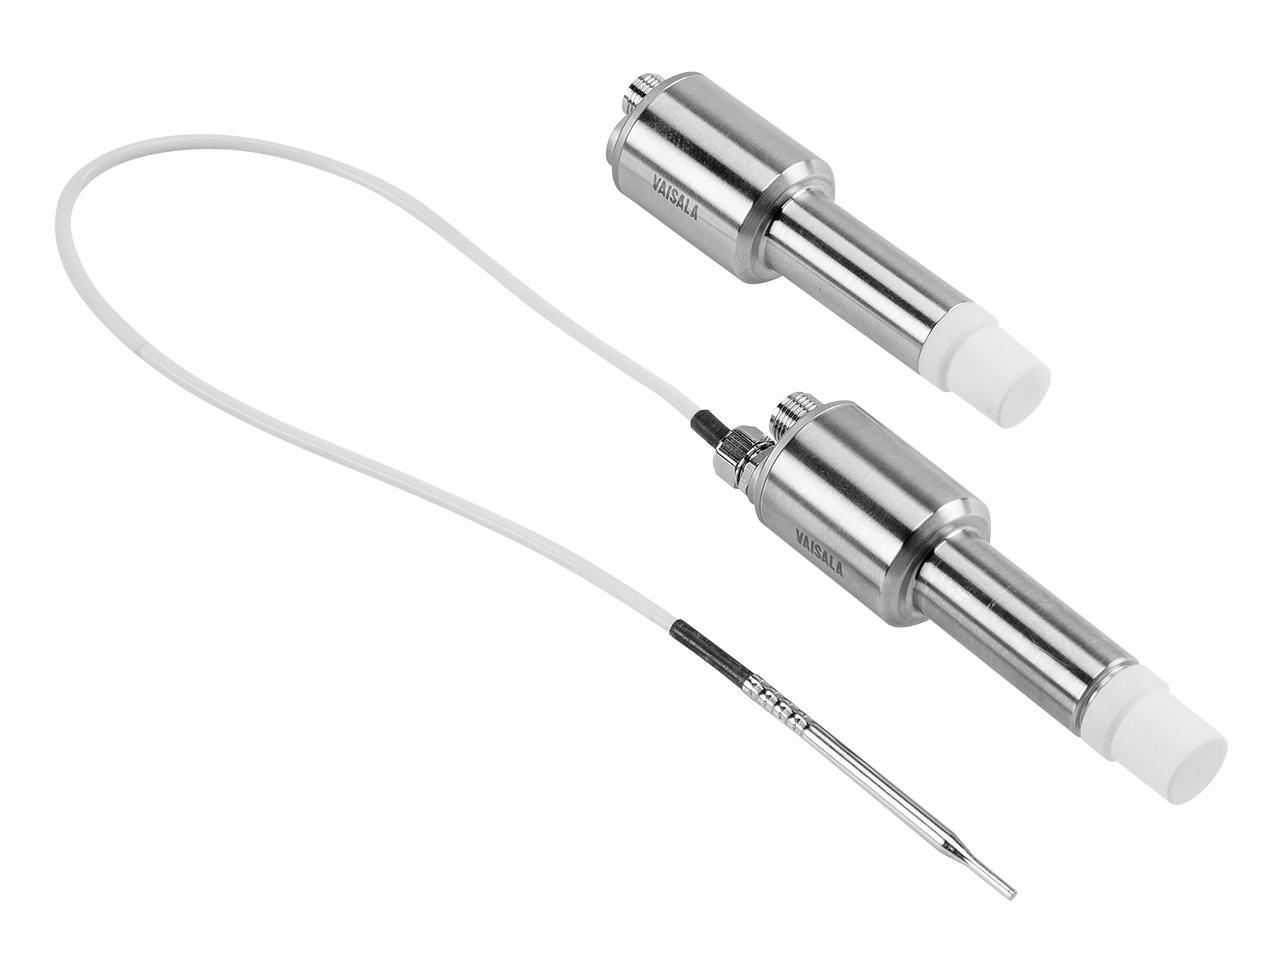 HPP271 and HPP272 probes with PEROXCAP® hydrogen peroxide sensor, H2O2 sensor for vaporized hydrogen peroxide concentration monitoring in bio-decontamination